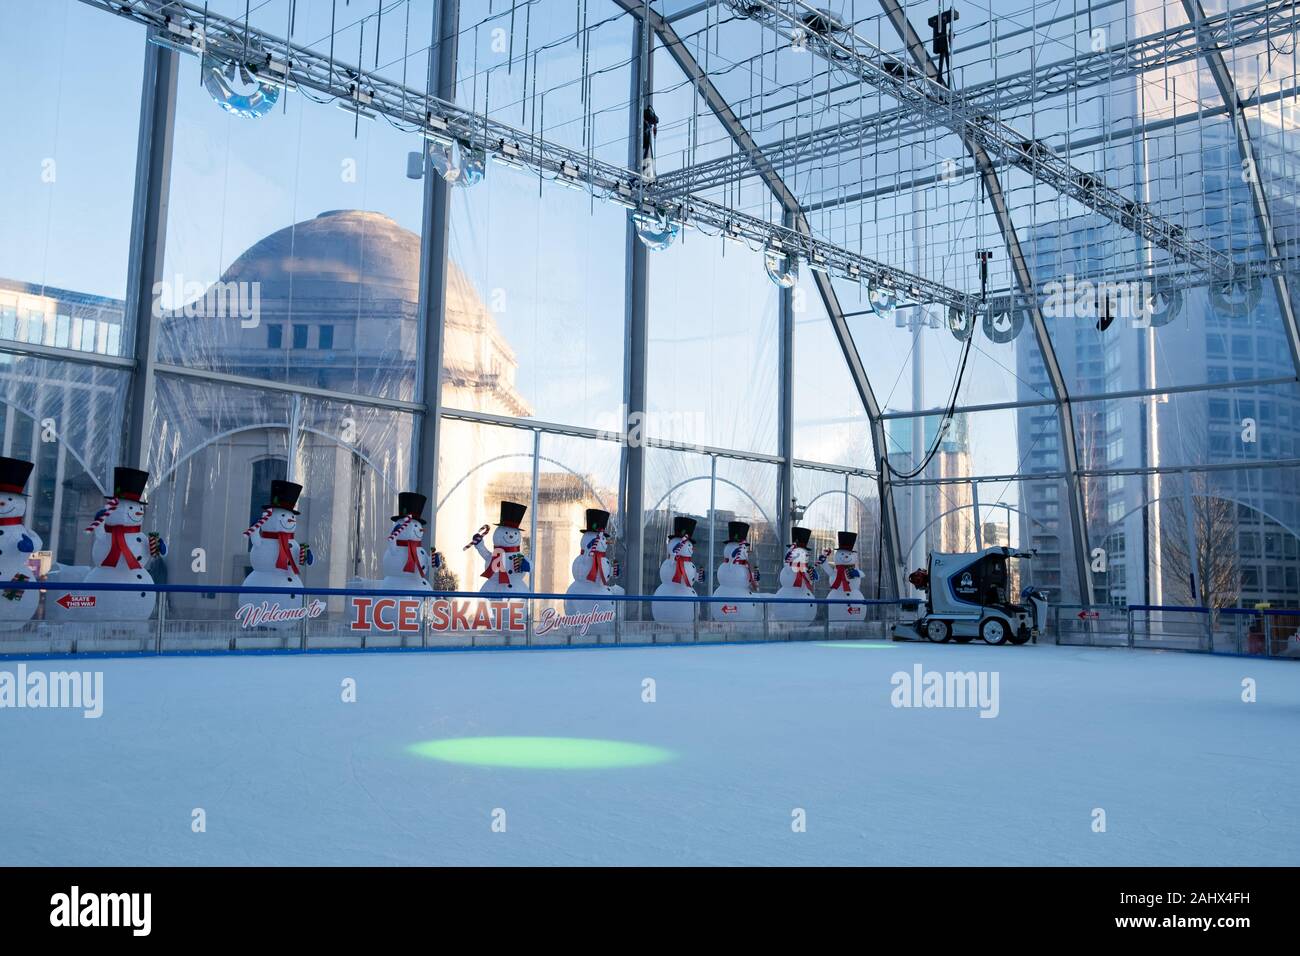 Ice Skate Birmingham is the UK's most popular and largest Ice Rink with a roof on it. Stock Photo